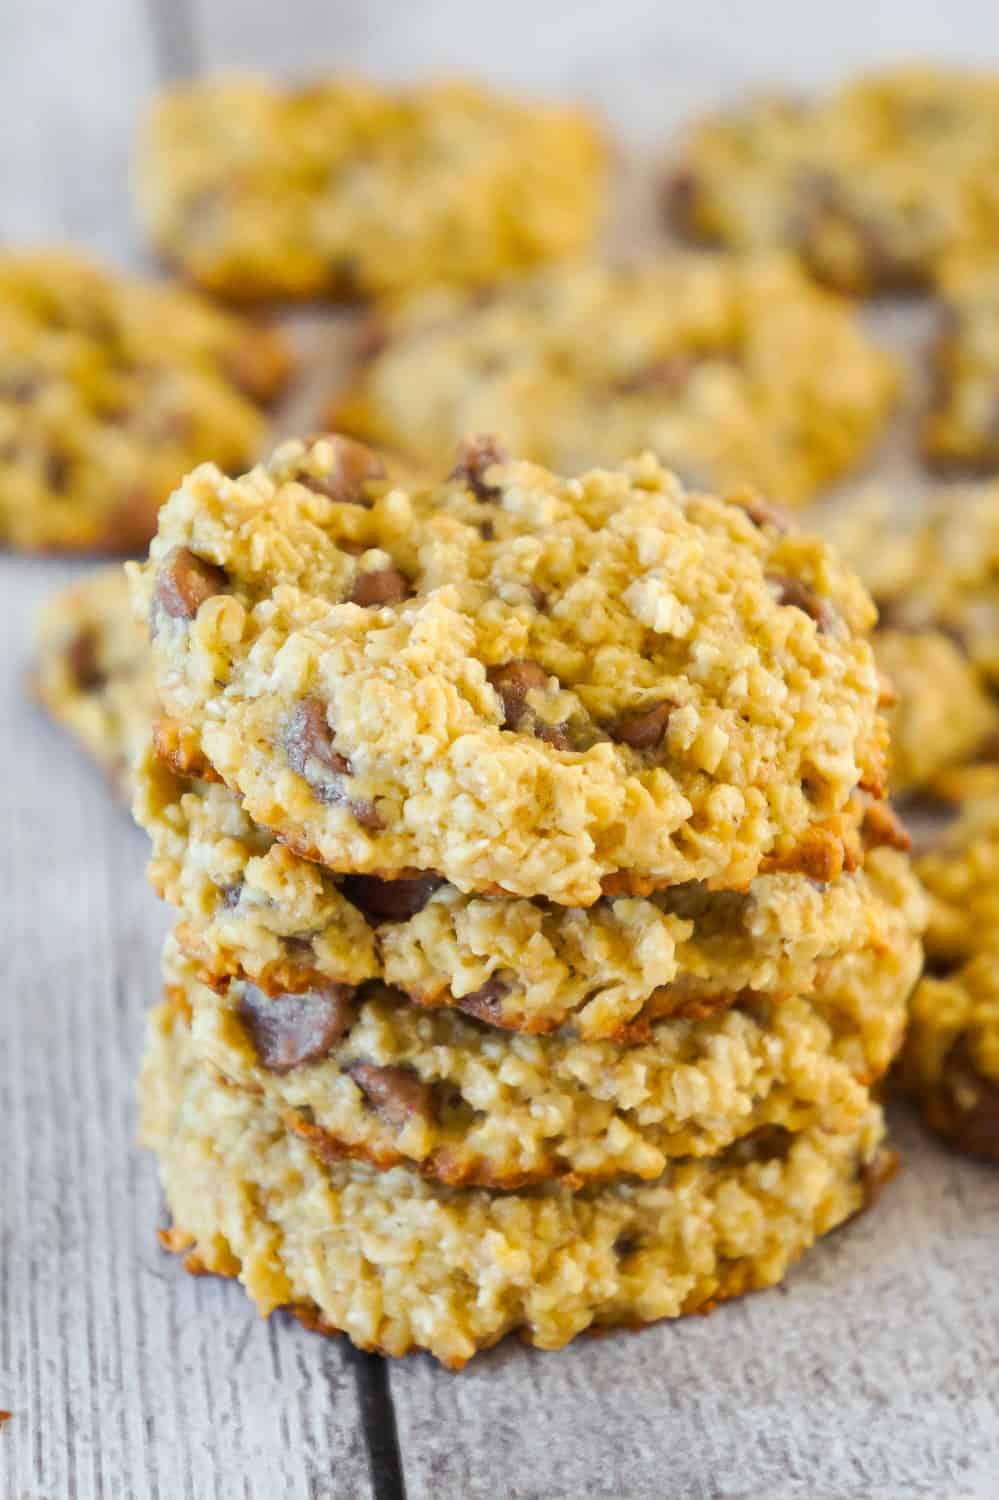 Banana Oatmeal Cookies are an easy flourless cookie recipe. These chewy oatmeal cookies are loaded with milk chocolate chips.